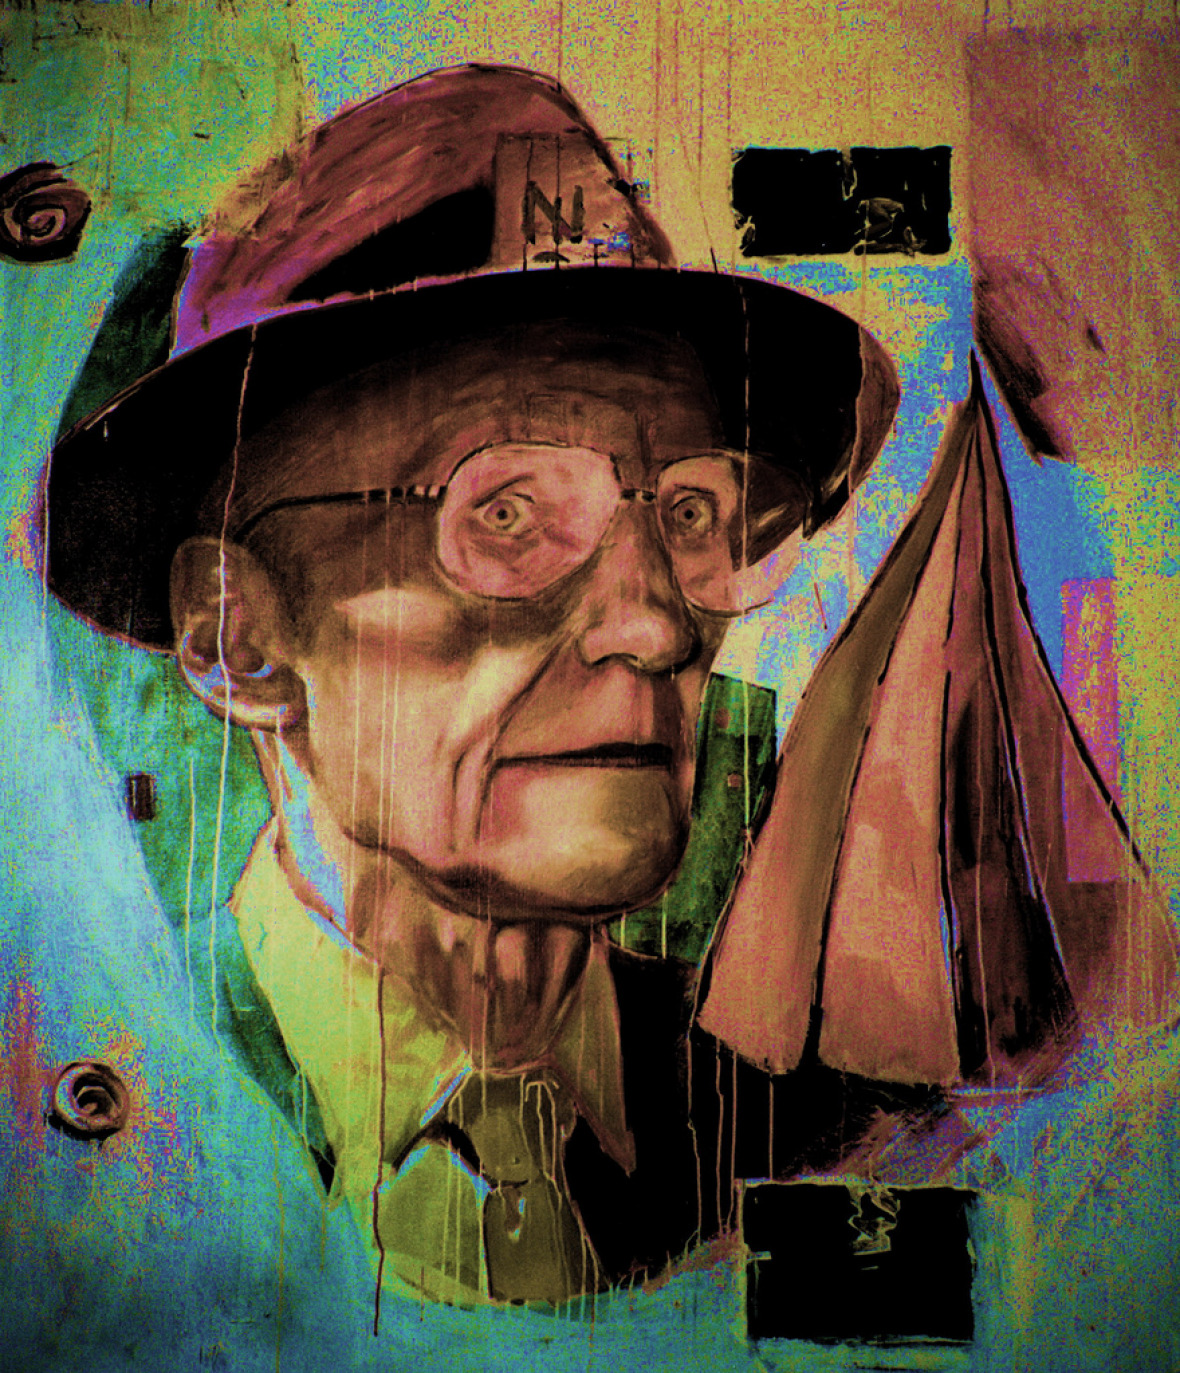 Christiaan Tonnis: William S. Burroughs 3 / Oil on Canvas / 61 x 72.8 inches / 1999 Print